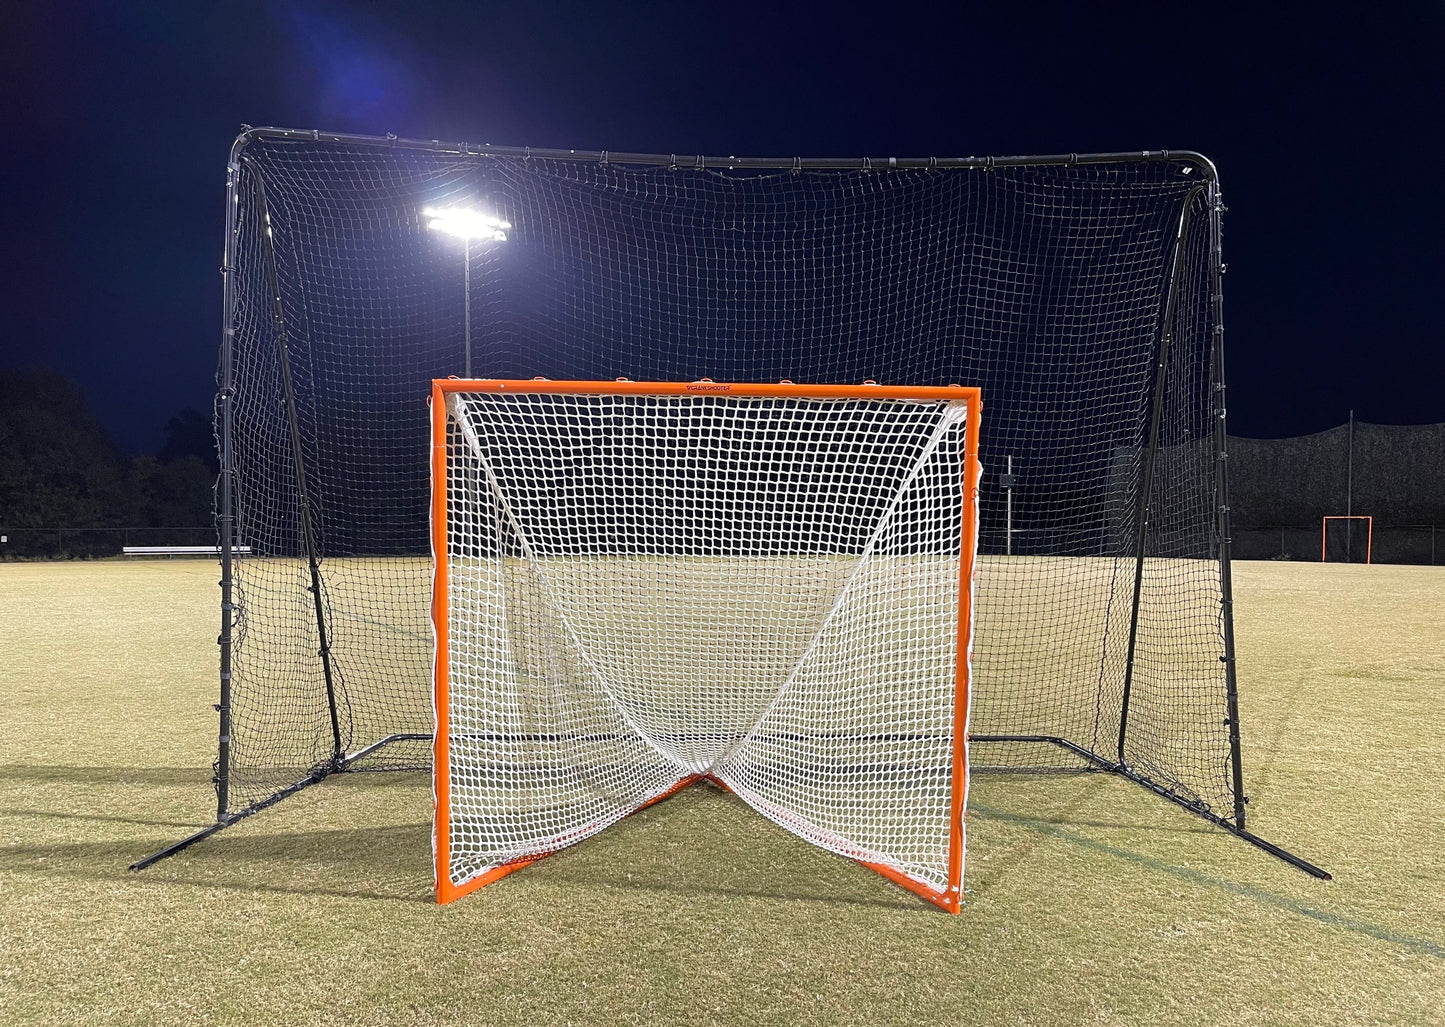 CrankCage Backstop - 14' x 10' x 7' by Crankshooter® (Introductory Price) Ships Free